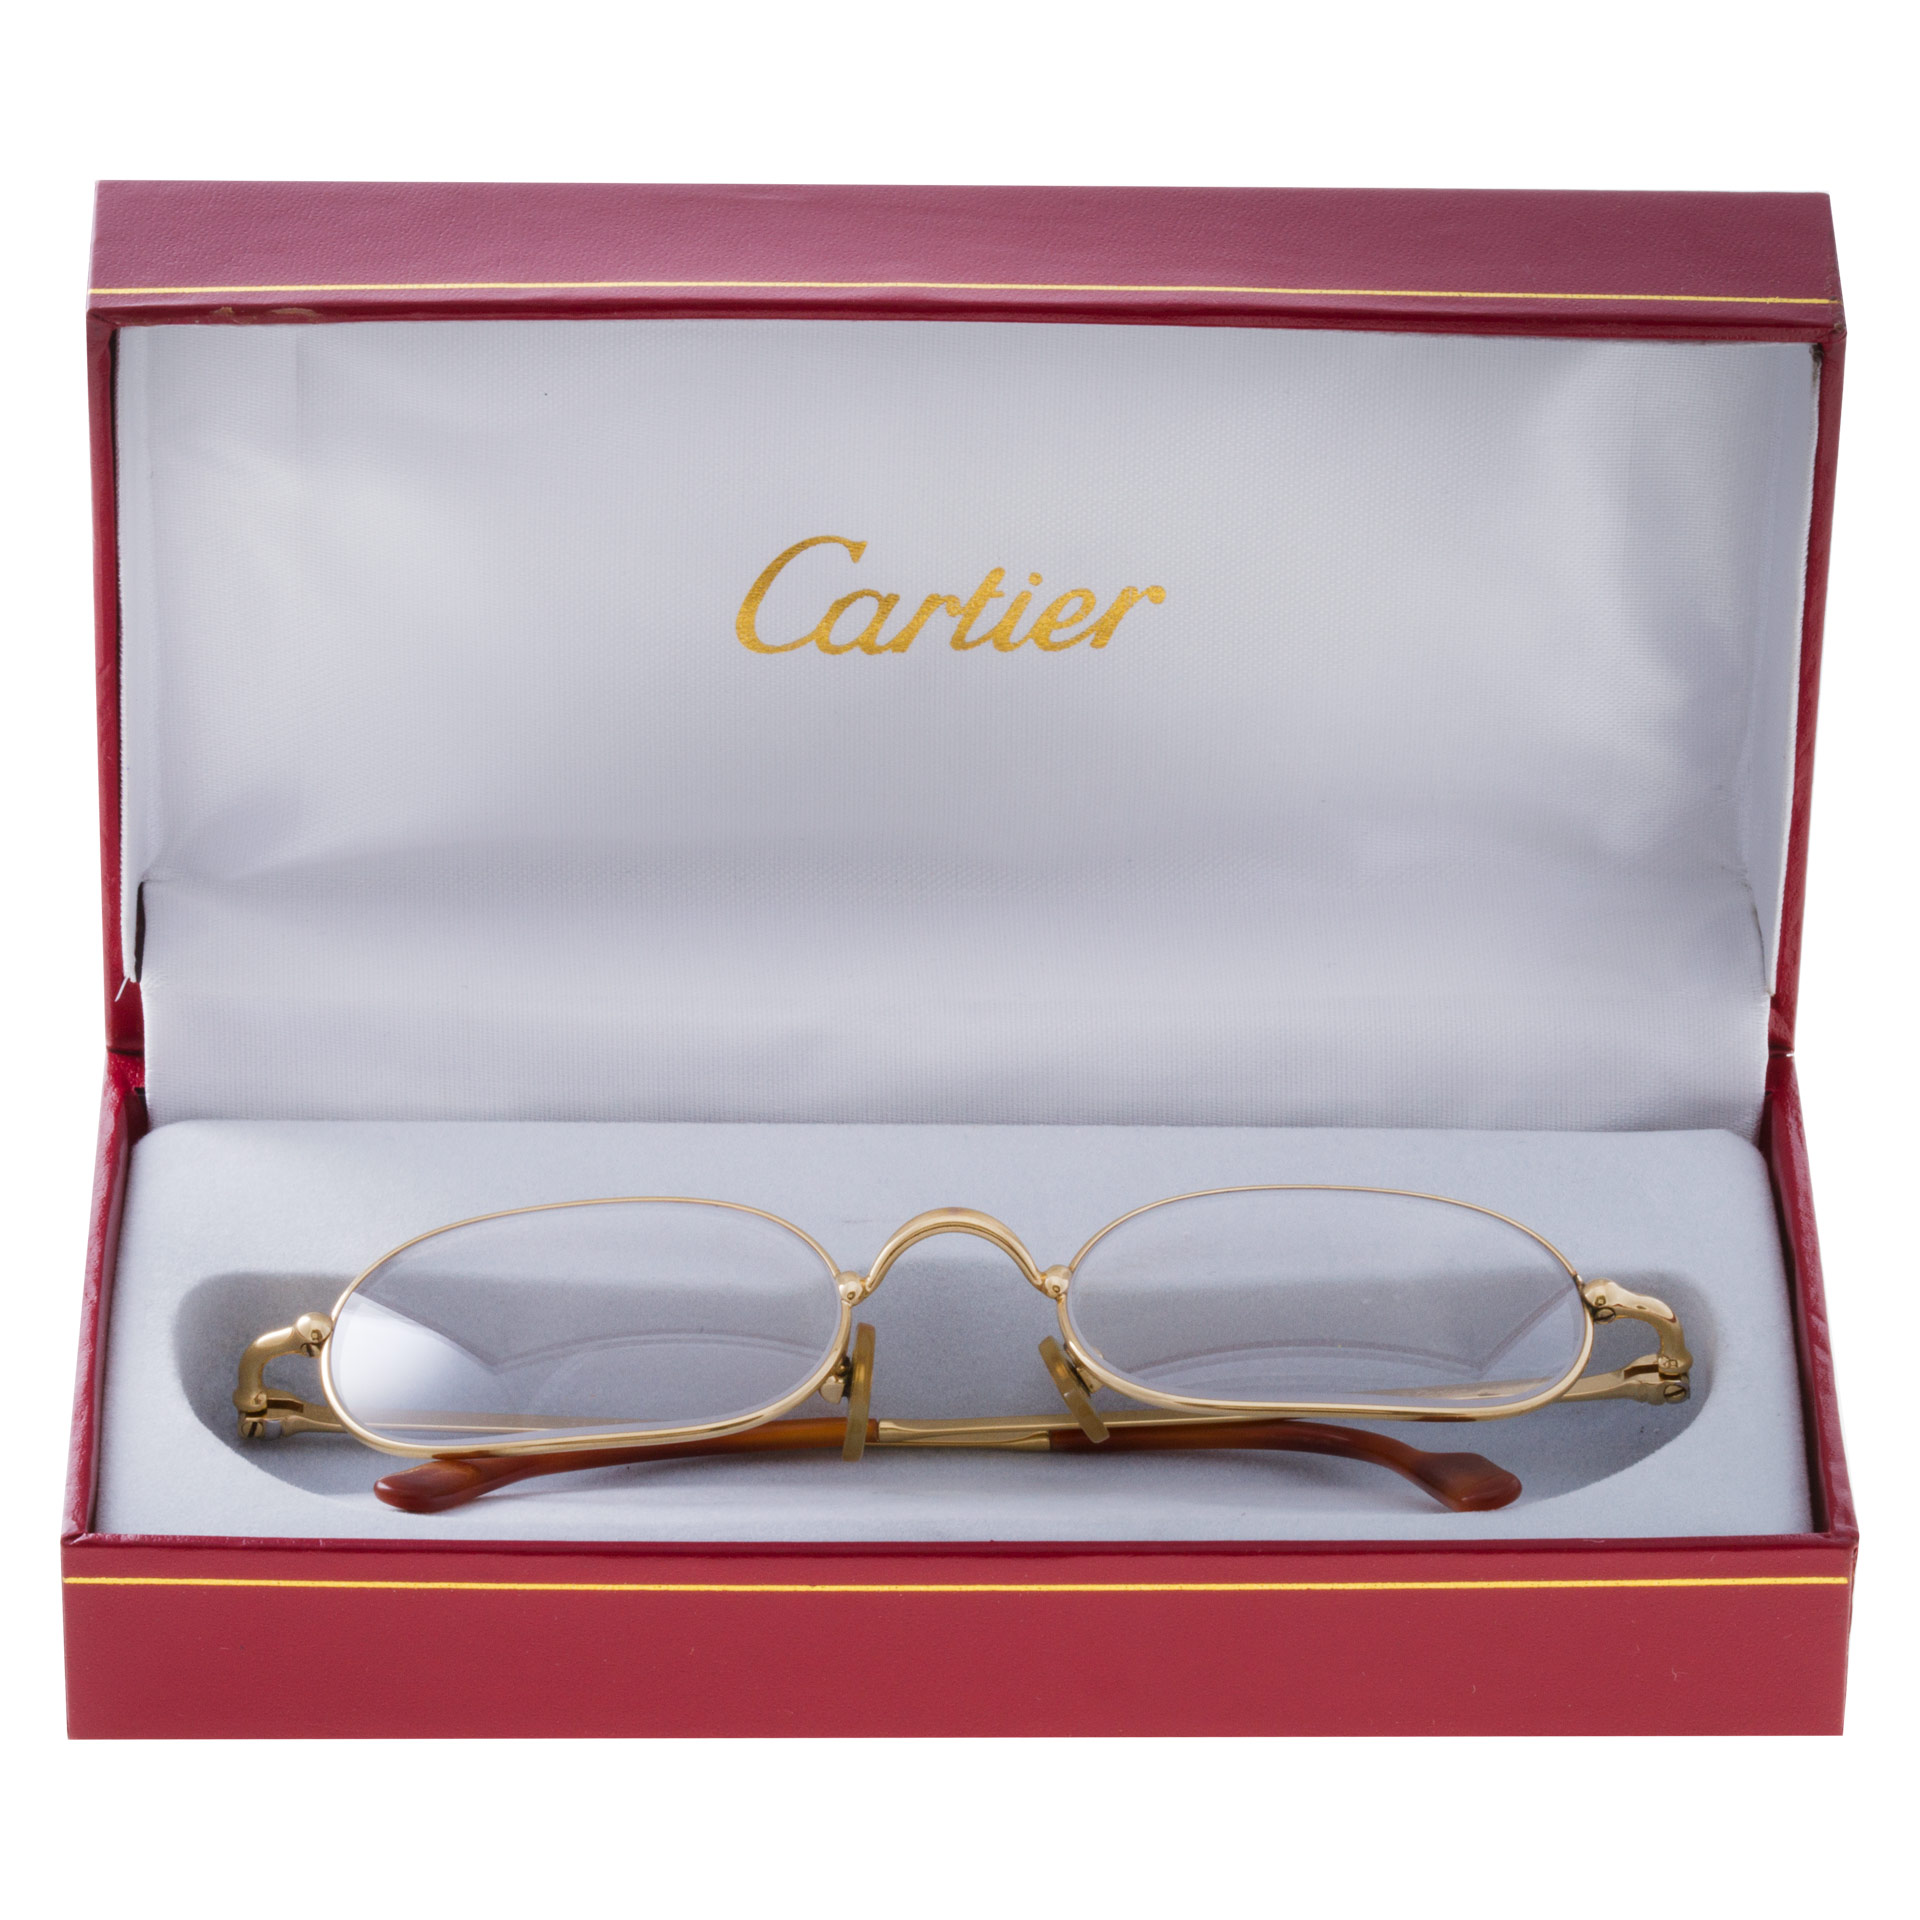 Cartier Frames with box image 2